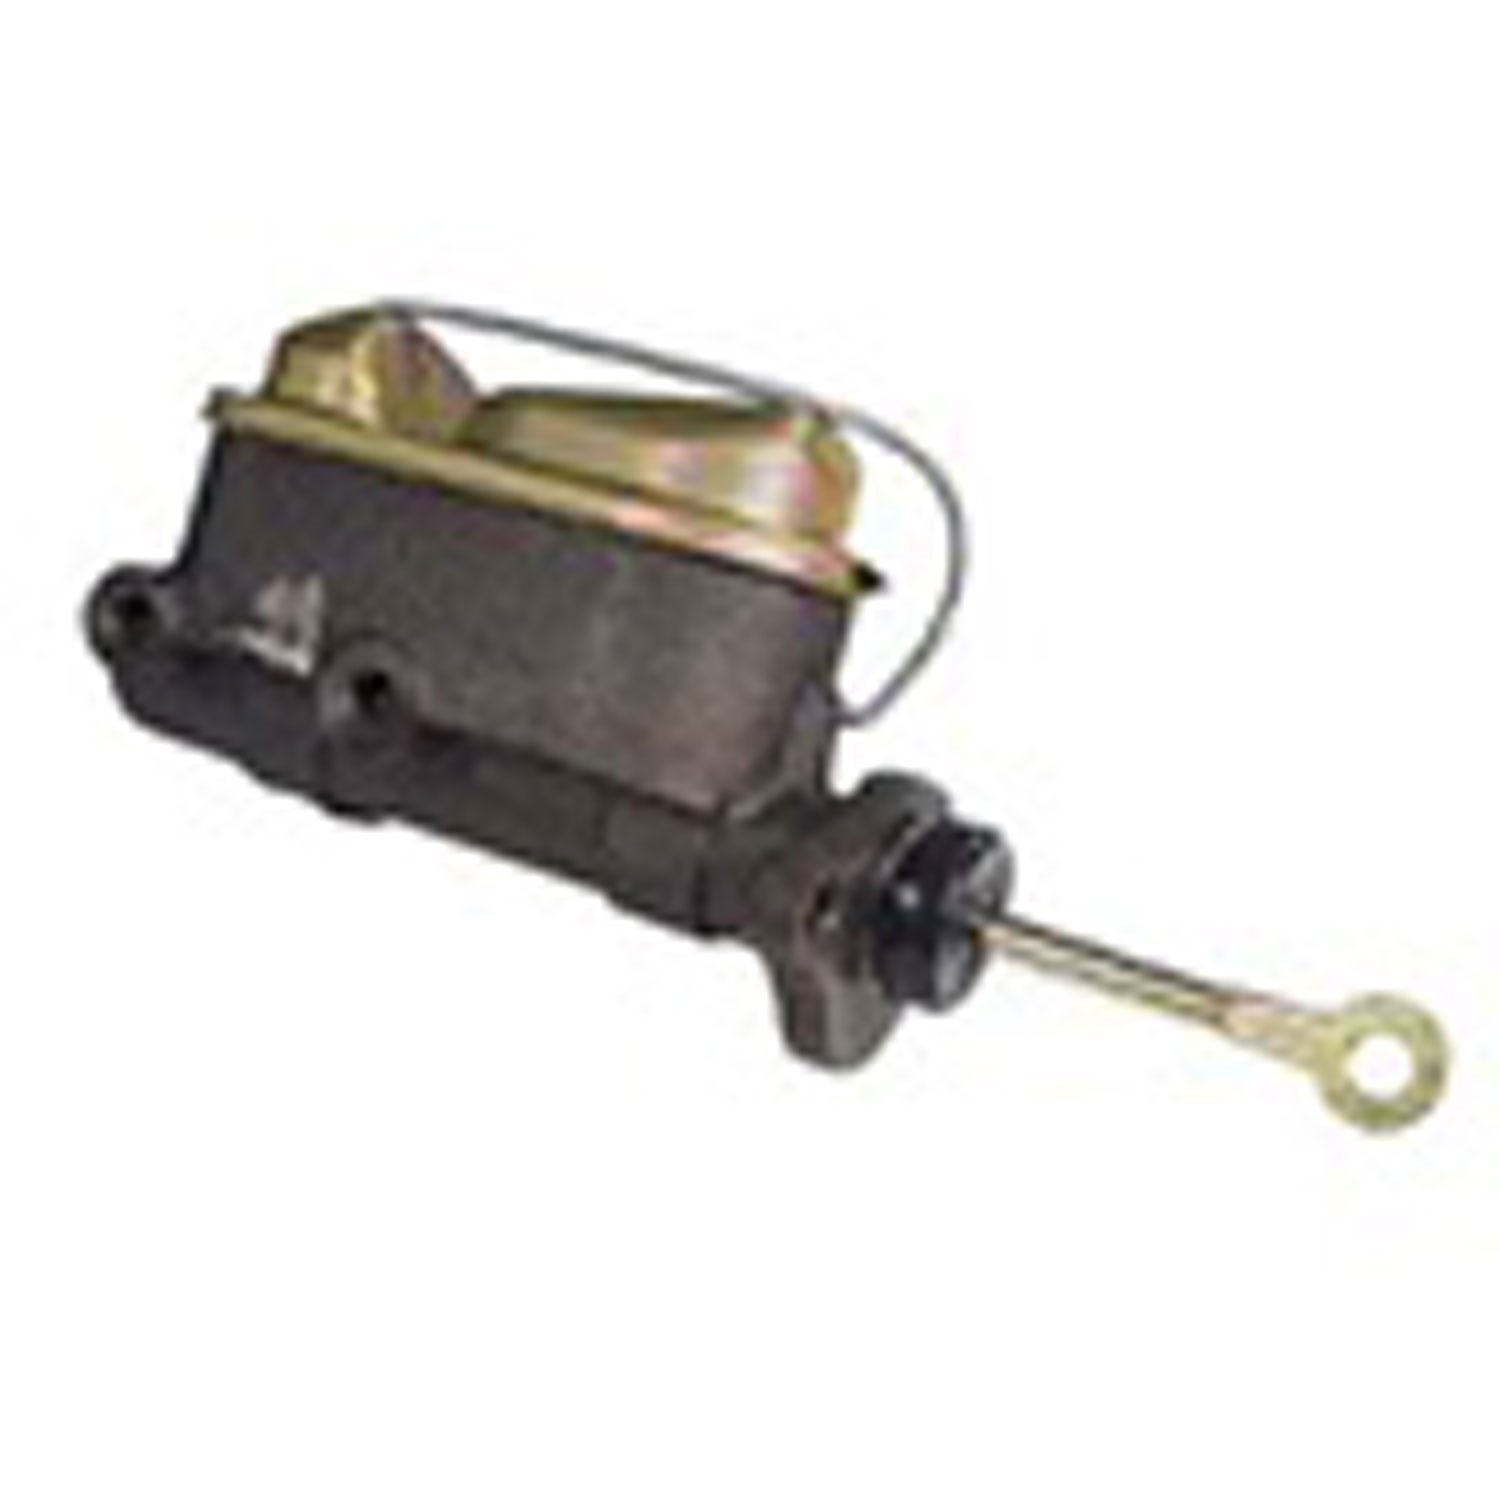 Replacement brake master cylinder from Omix-ADA, Fits 78-81 Jeep CJ5 78-86 CJ7 and 81-86 CJ8 wit